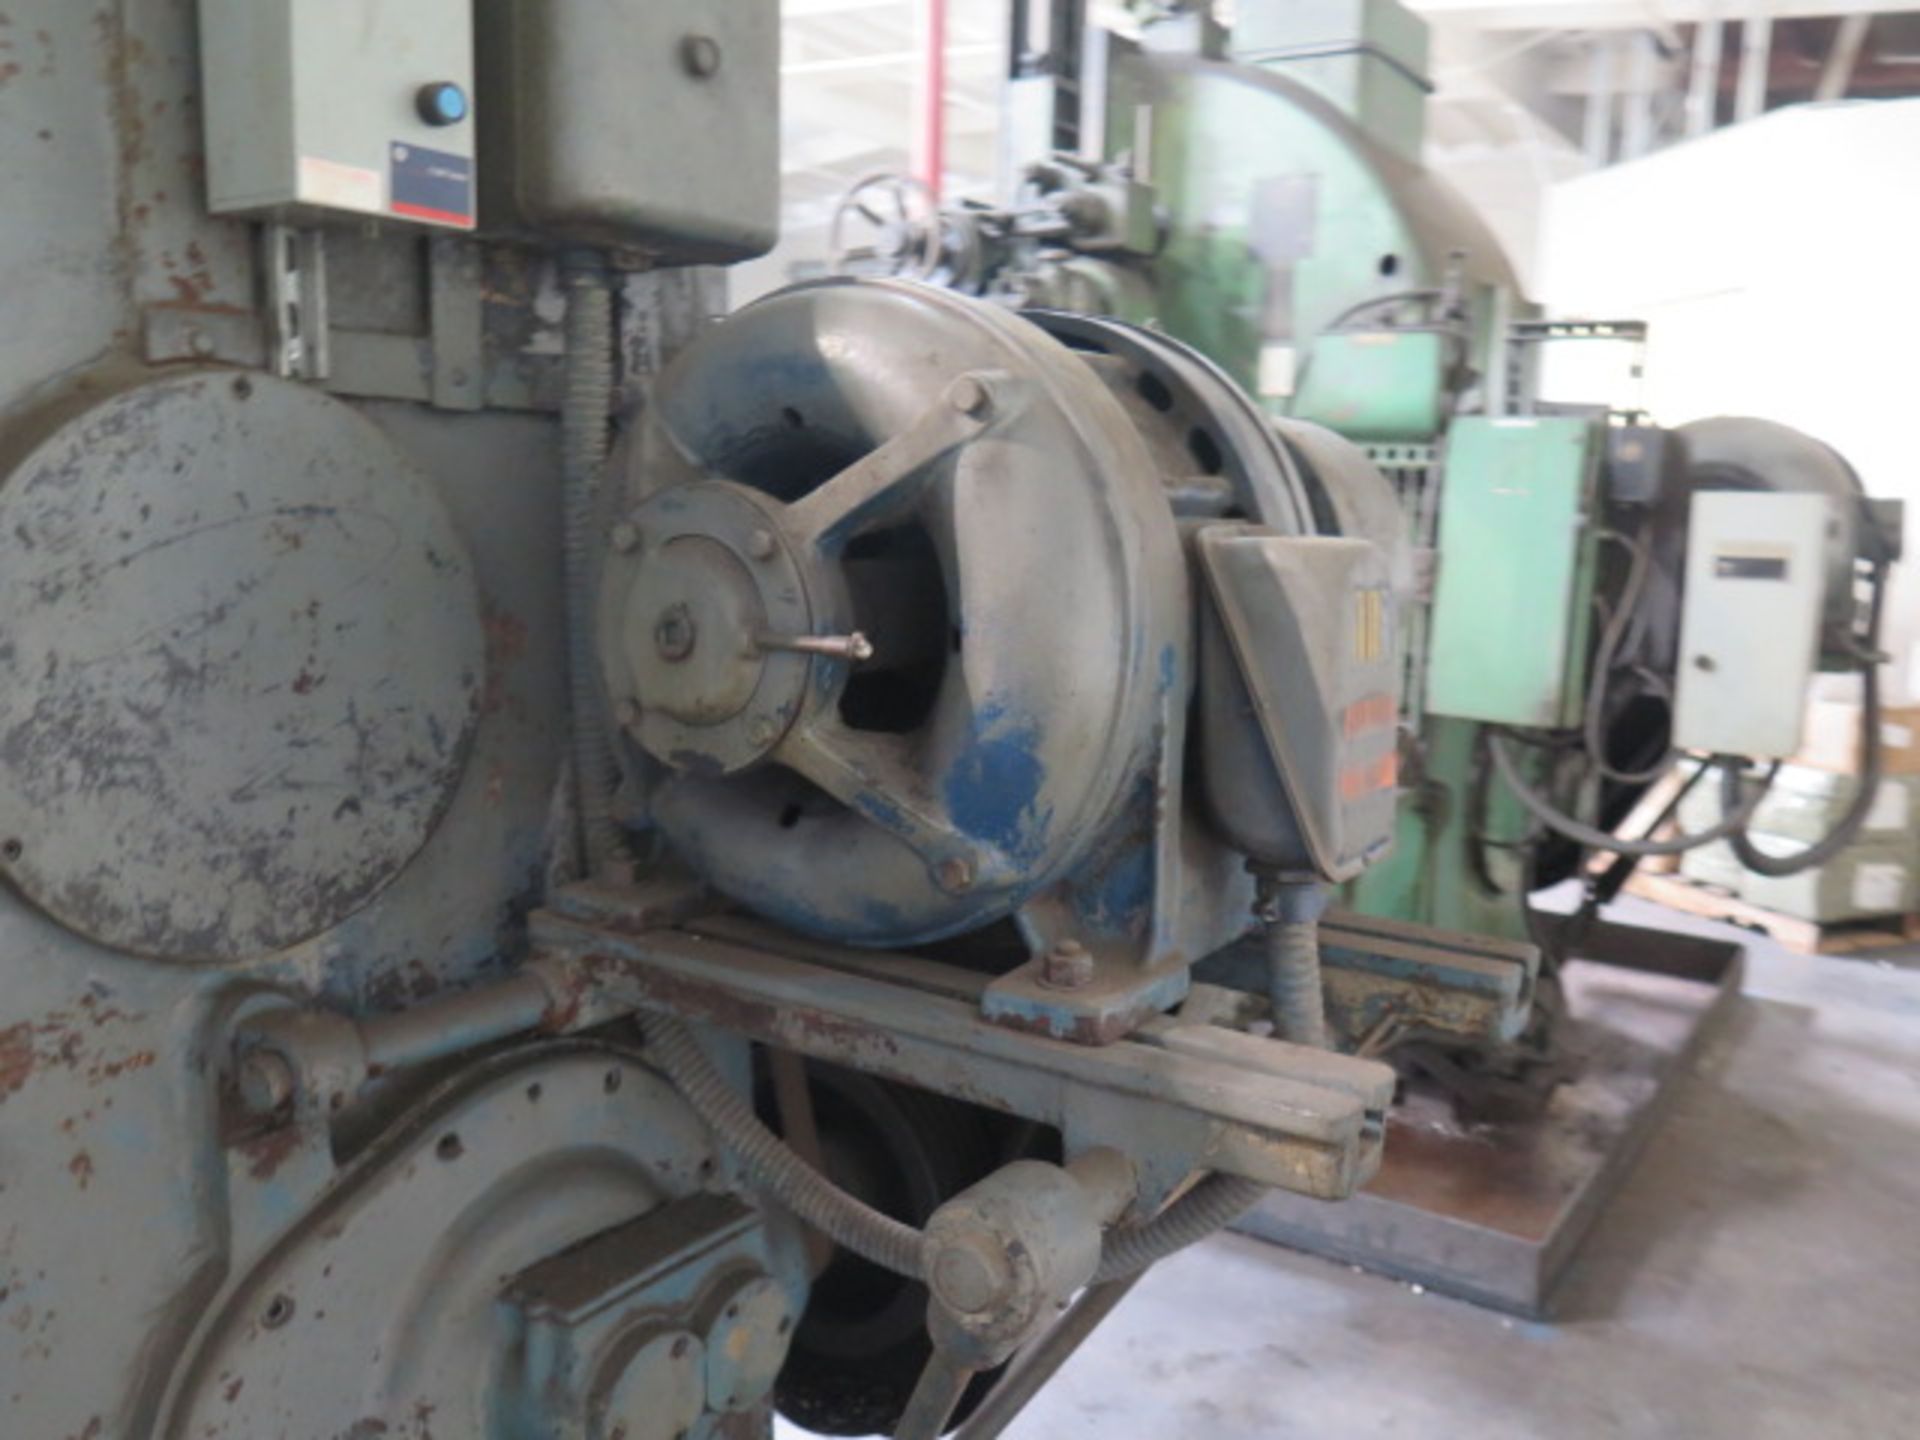 Bullard 50” Vertical Turret Lathe s/n 20938 w/ 5-Station Turret, 50" Chuck, 57" Swing, SOLD AS IS - Image 9 of 14